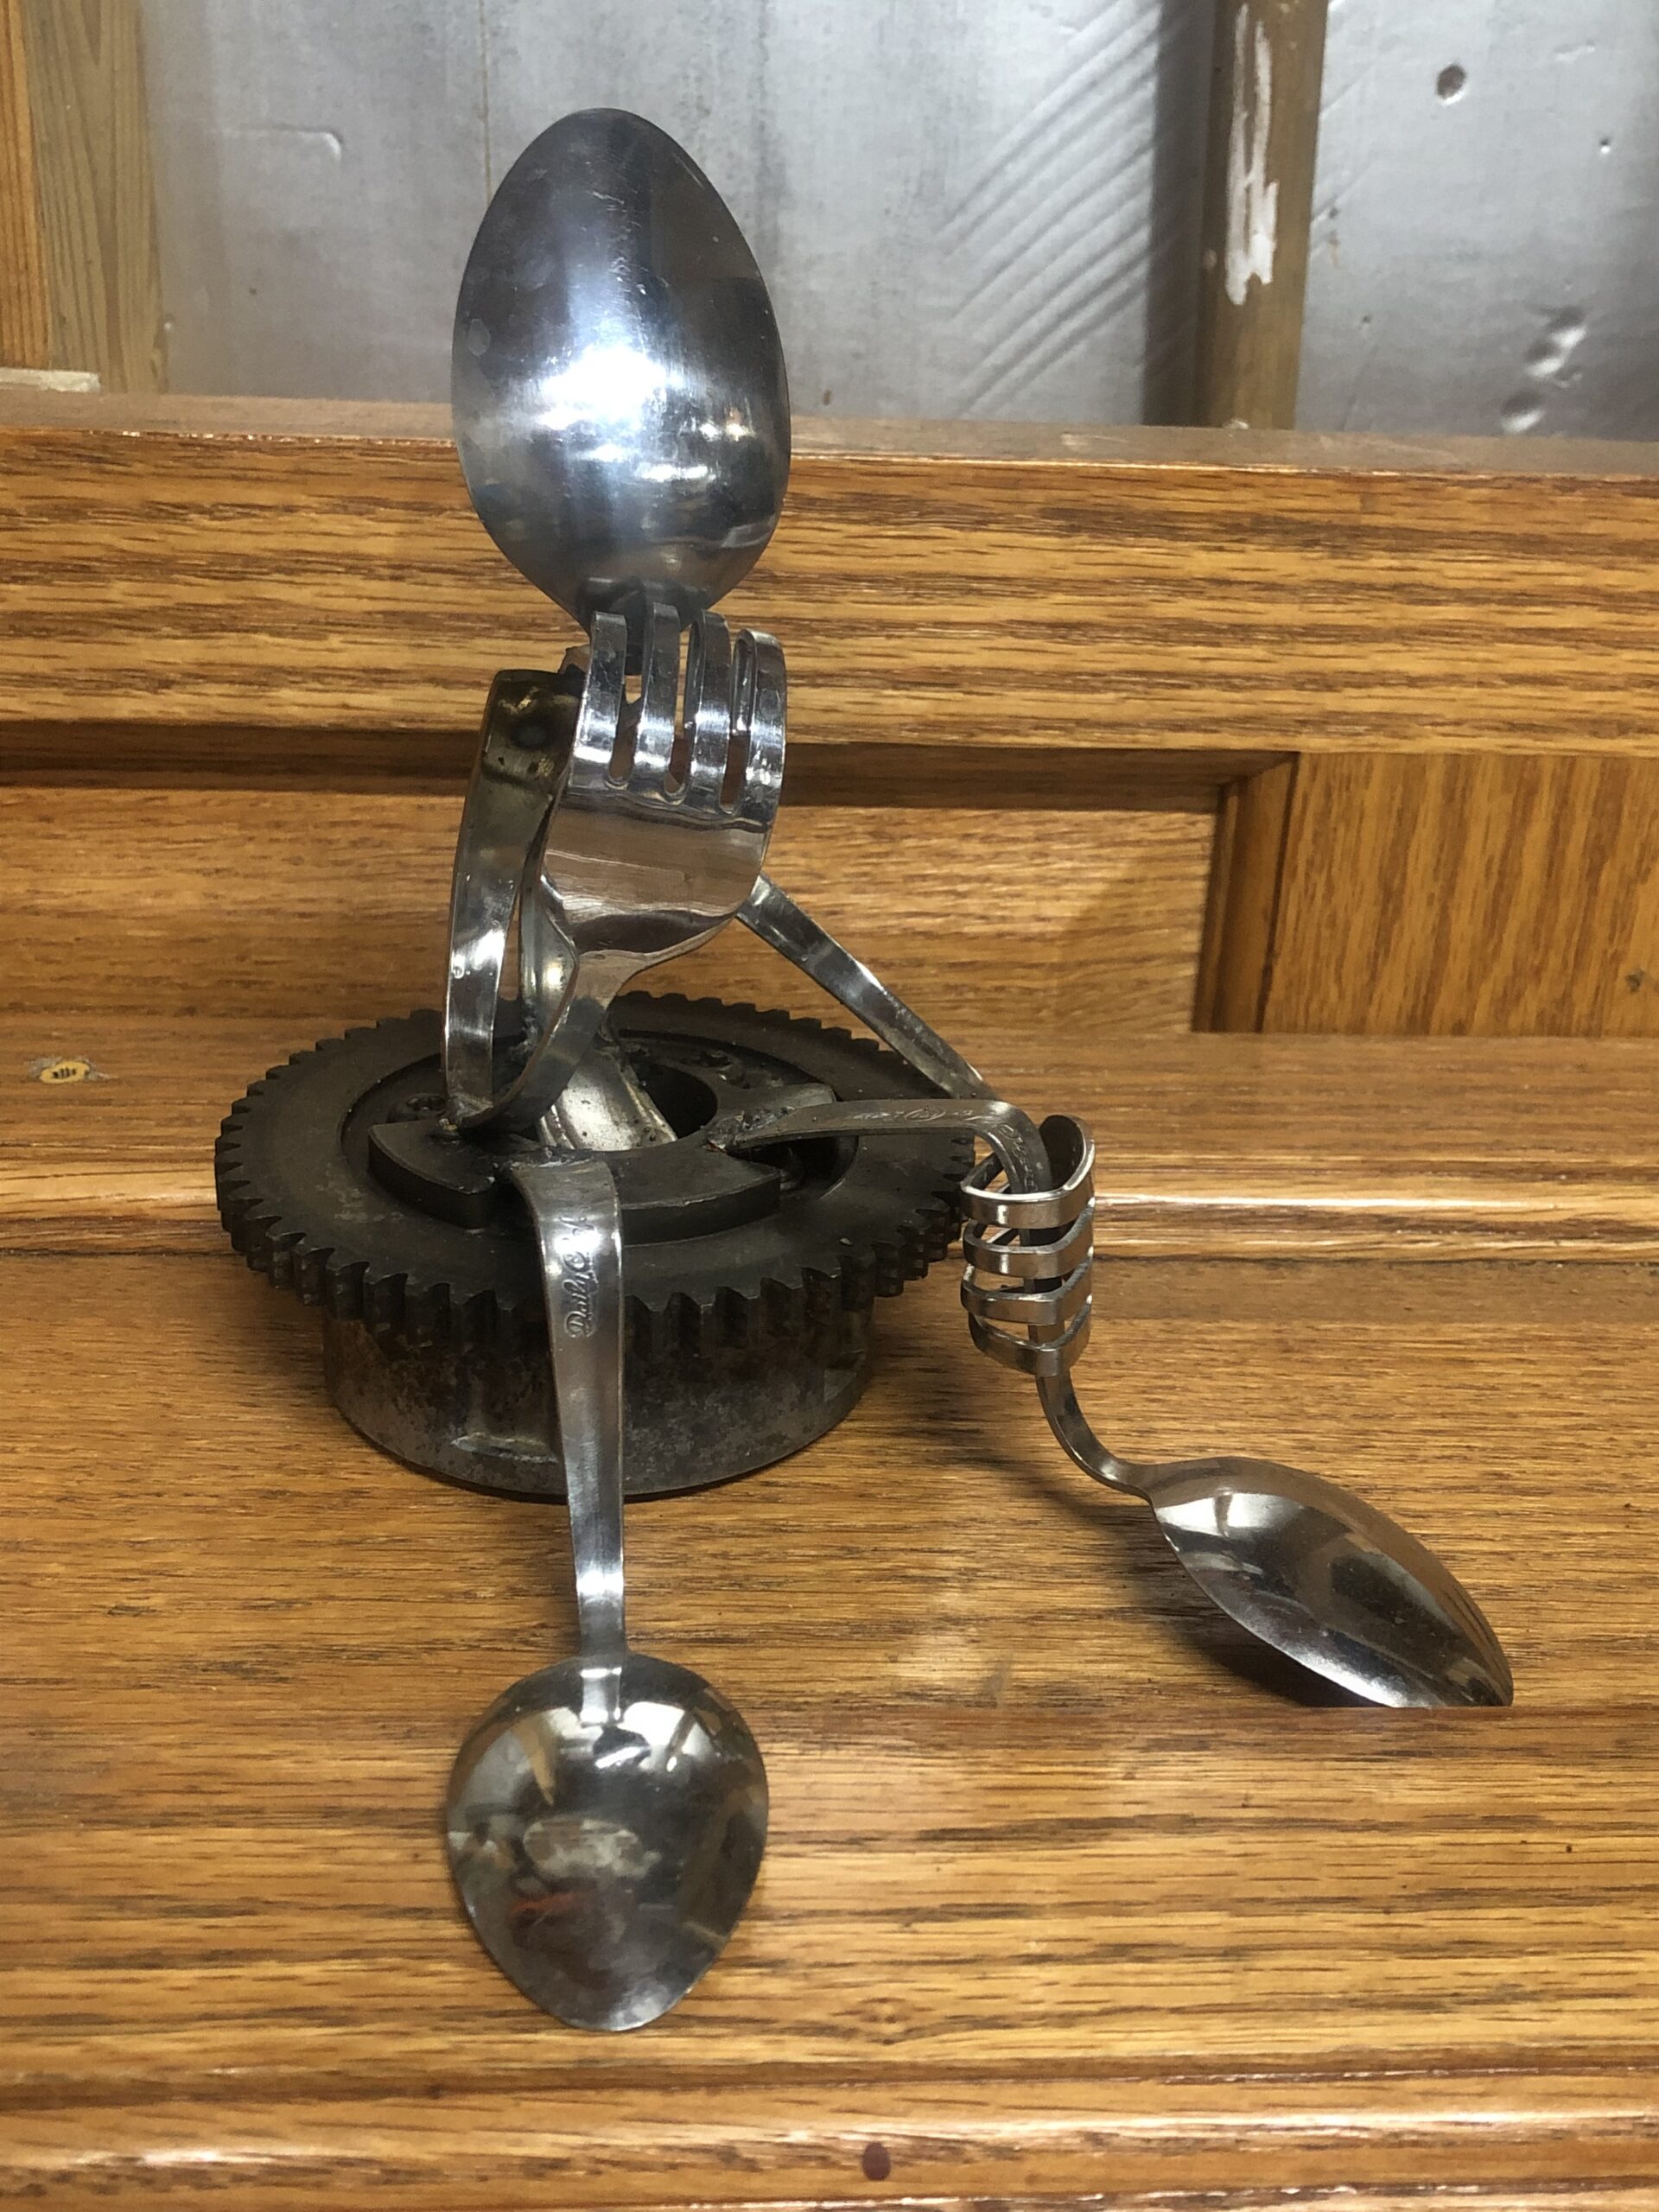 Spoons, forks, and gears assembled to make a "person" sitting in a "chair". Handmade by "Off The Cuff Metal Art"